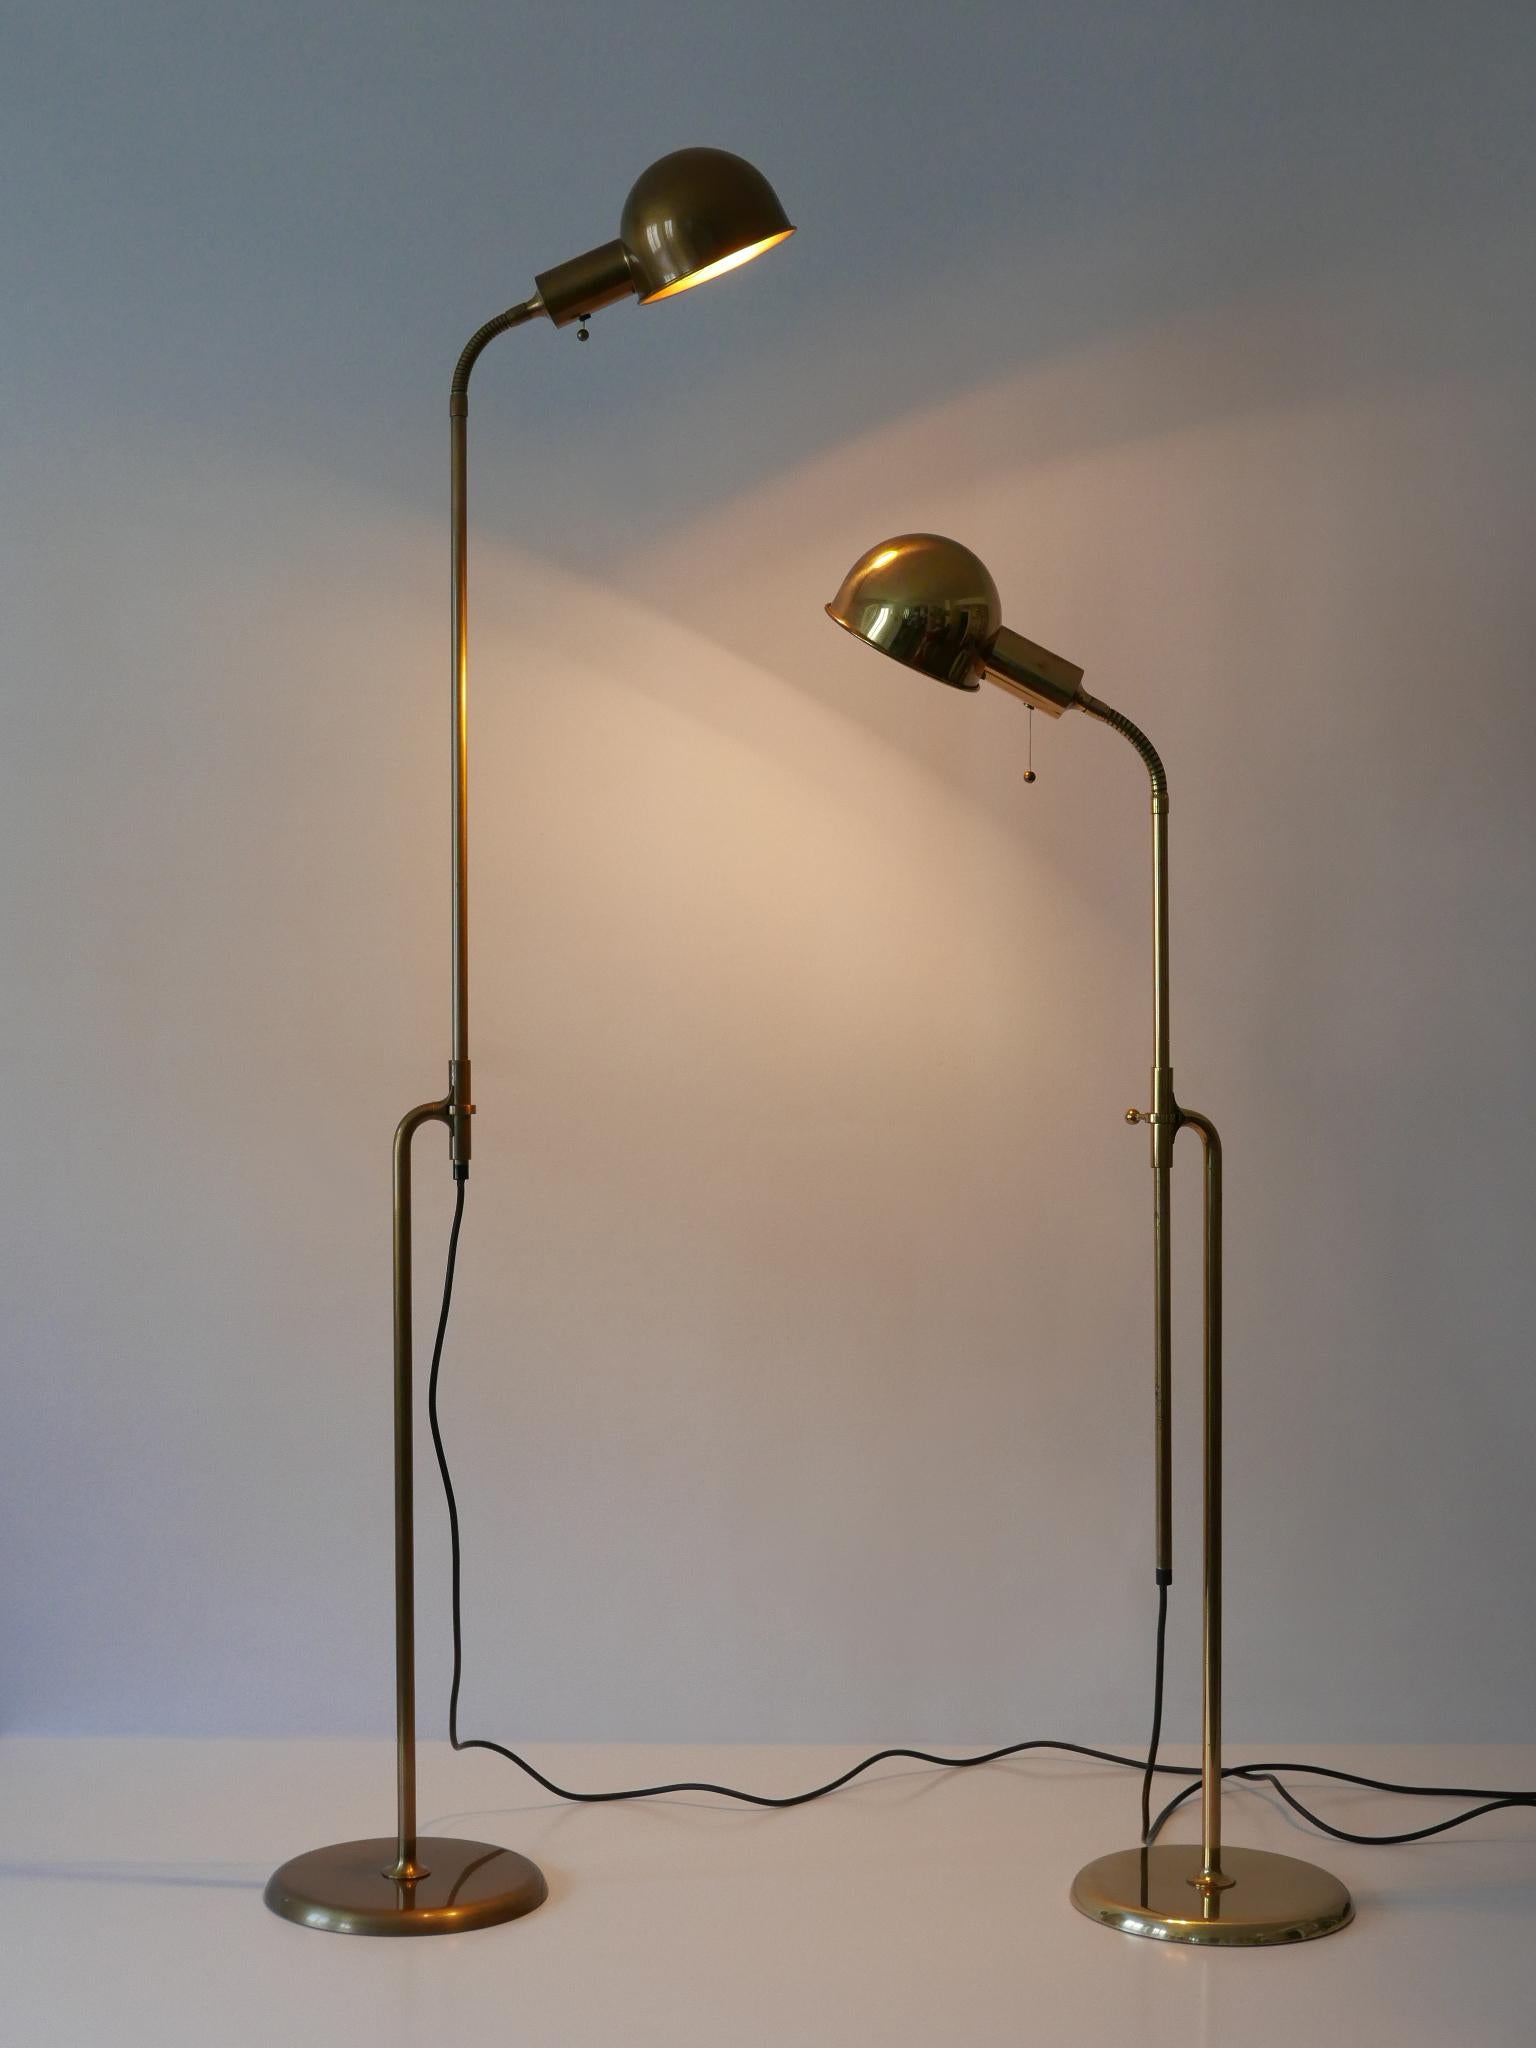 Set of Two Mid-Century Modern Reading Floor Lamps 'Bola' by Florian Schulz 1970s For Sale 1